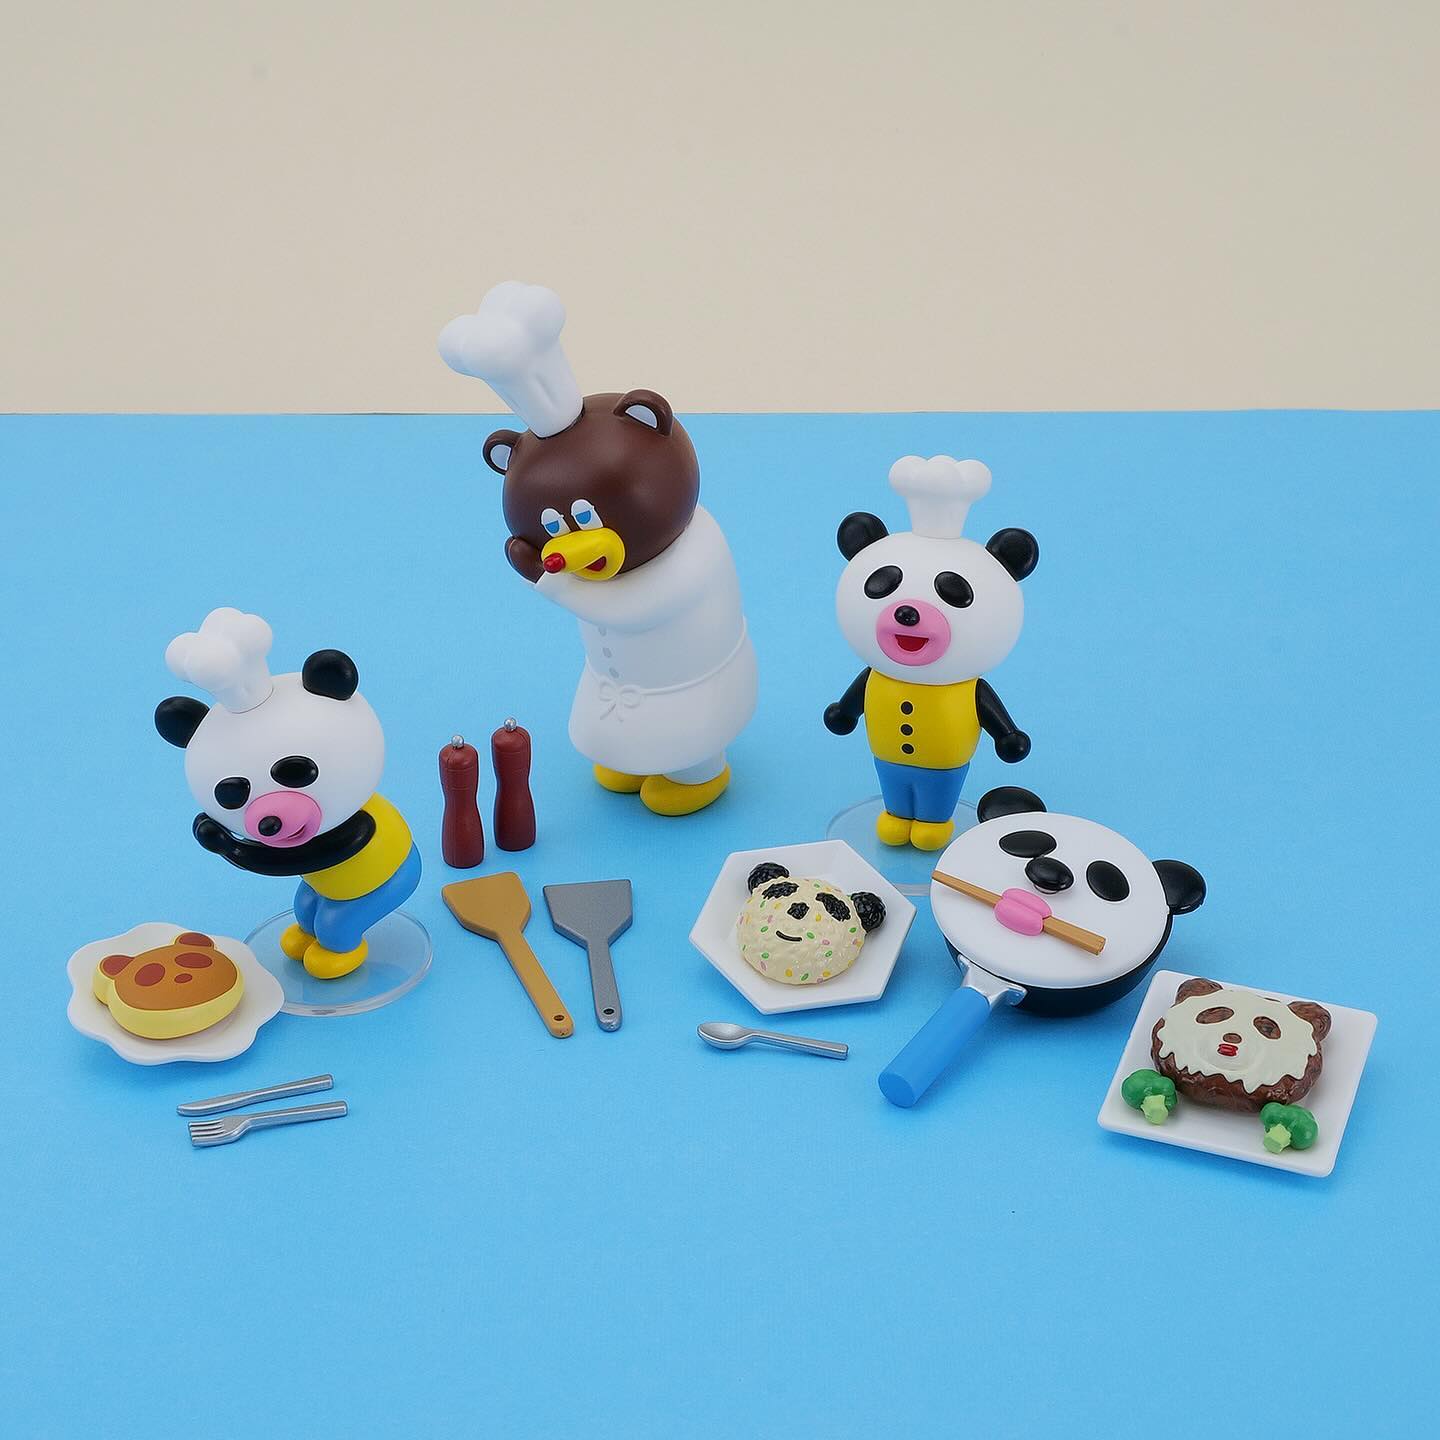 Photo by 【公式】株式会社ケンエレファント on March 01, 2024. May be an image of panda, bear, chopsticks, lego, fork, spatula and text.